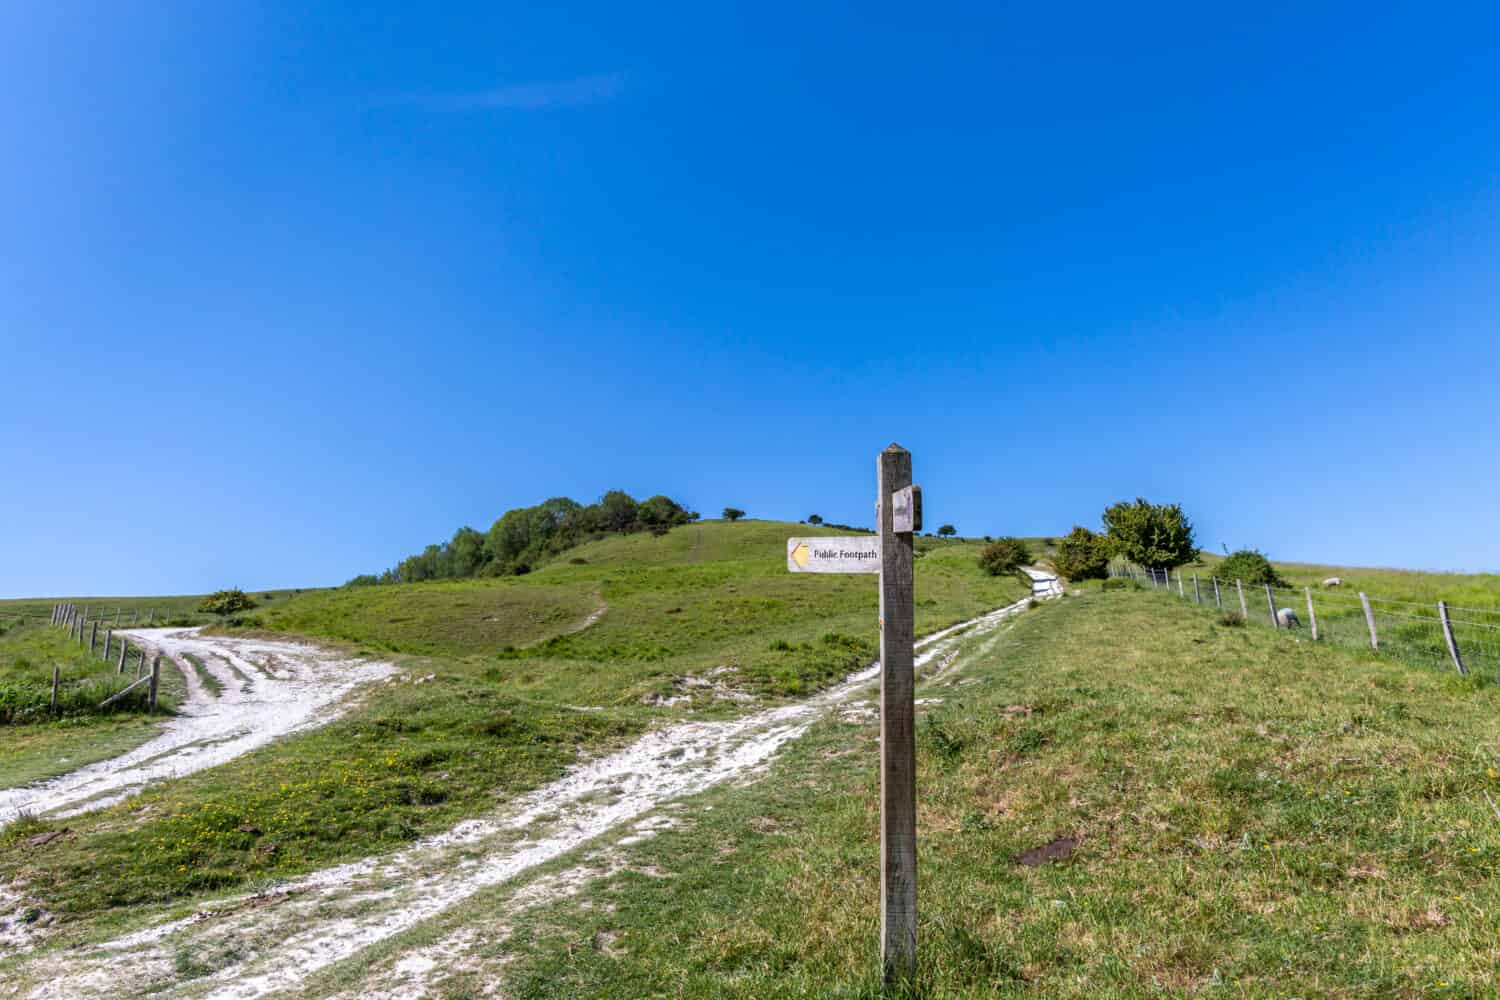 Chalk pathways in the South Downs, with a clear blue sky overhead